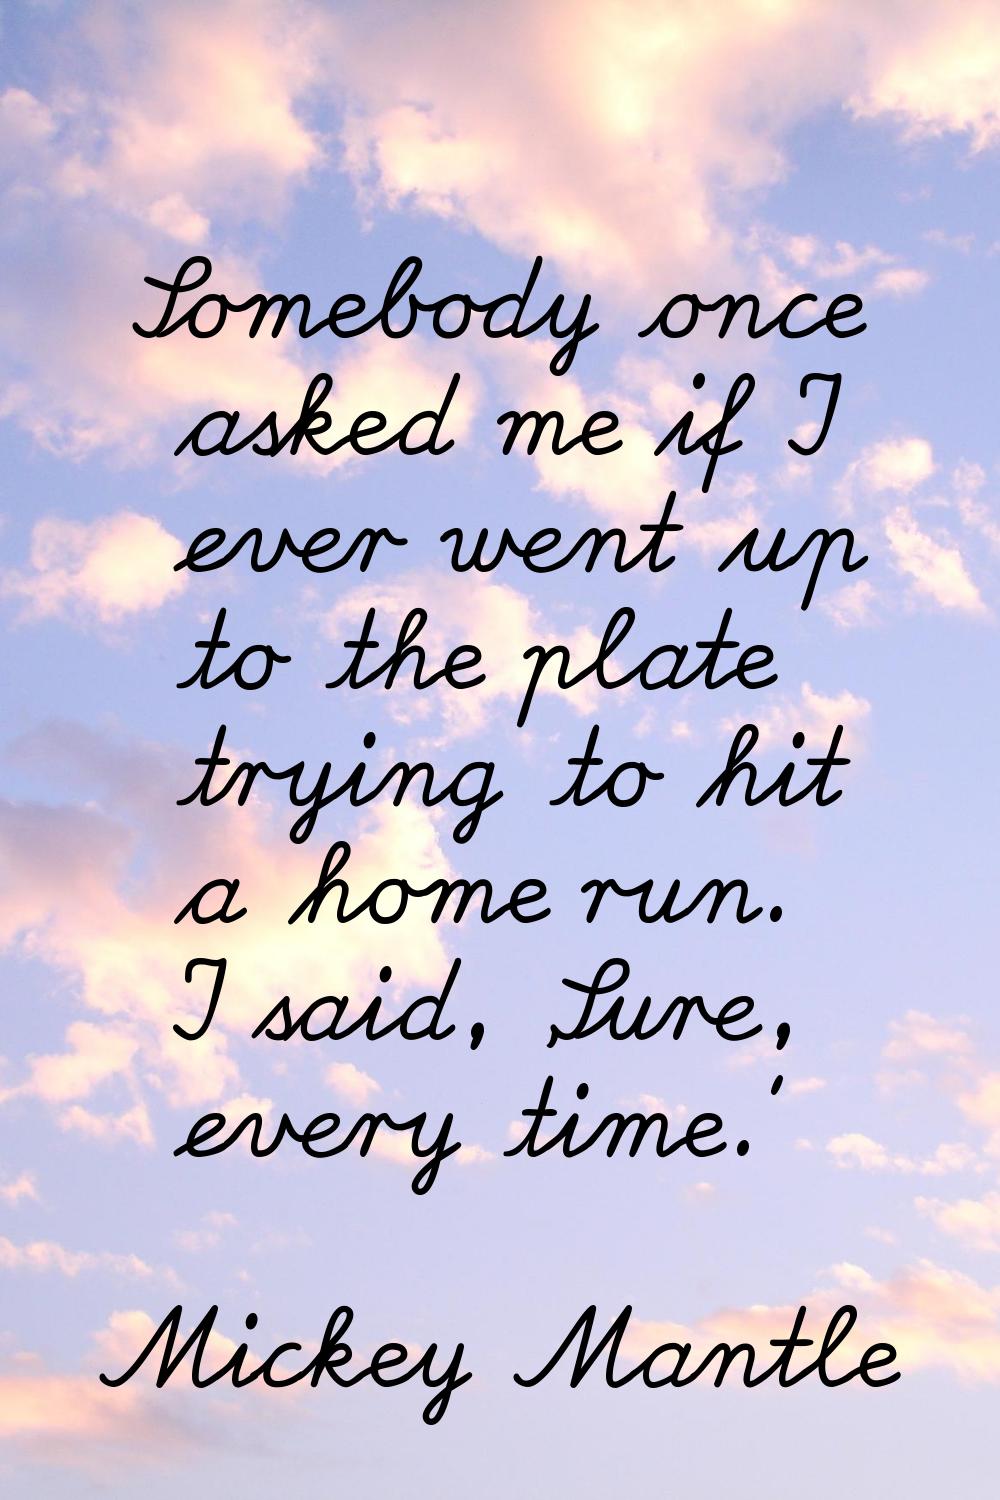 Somebody once asked me if I ever went up to the plate trying to hit a home run. I said, 'Sure, ever